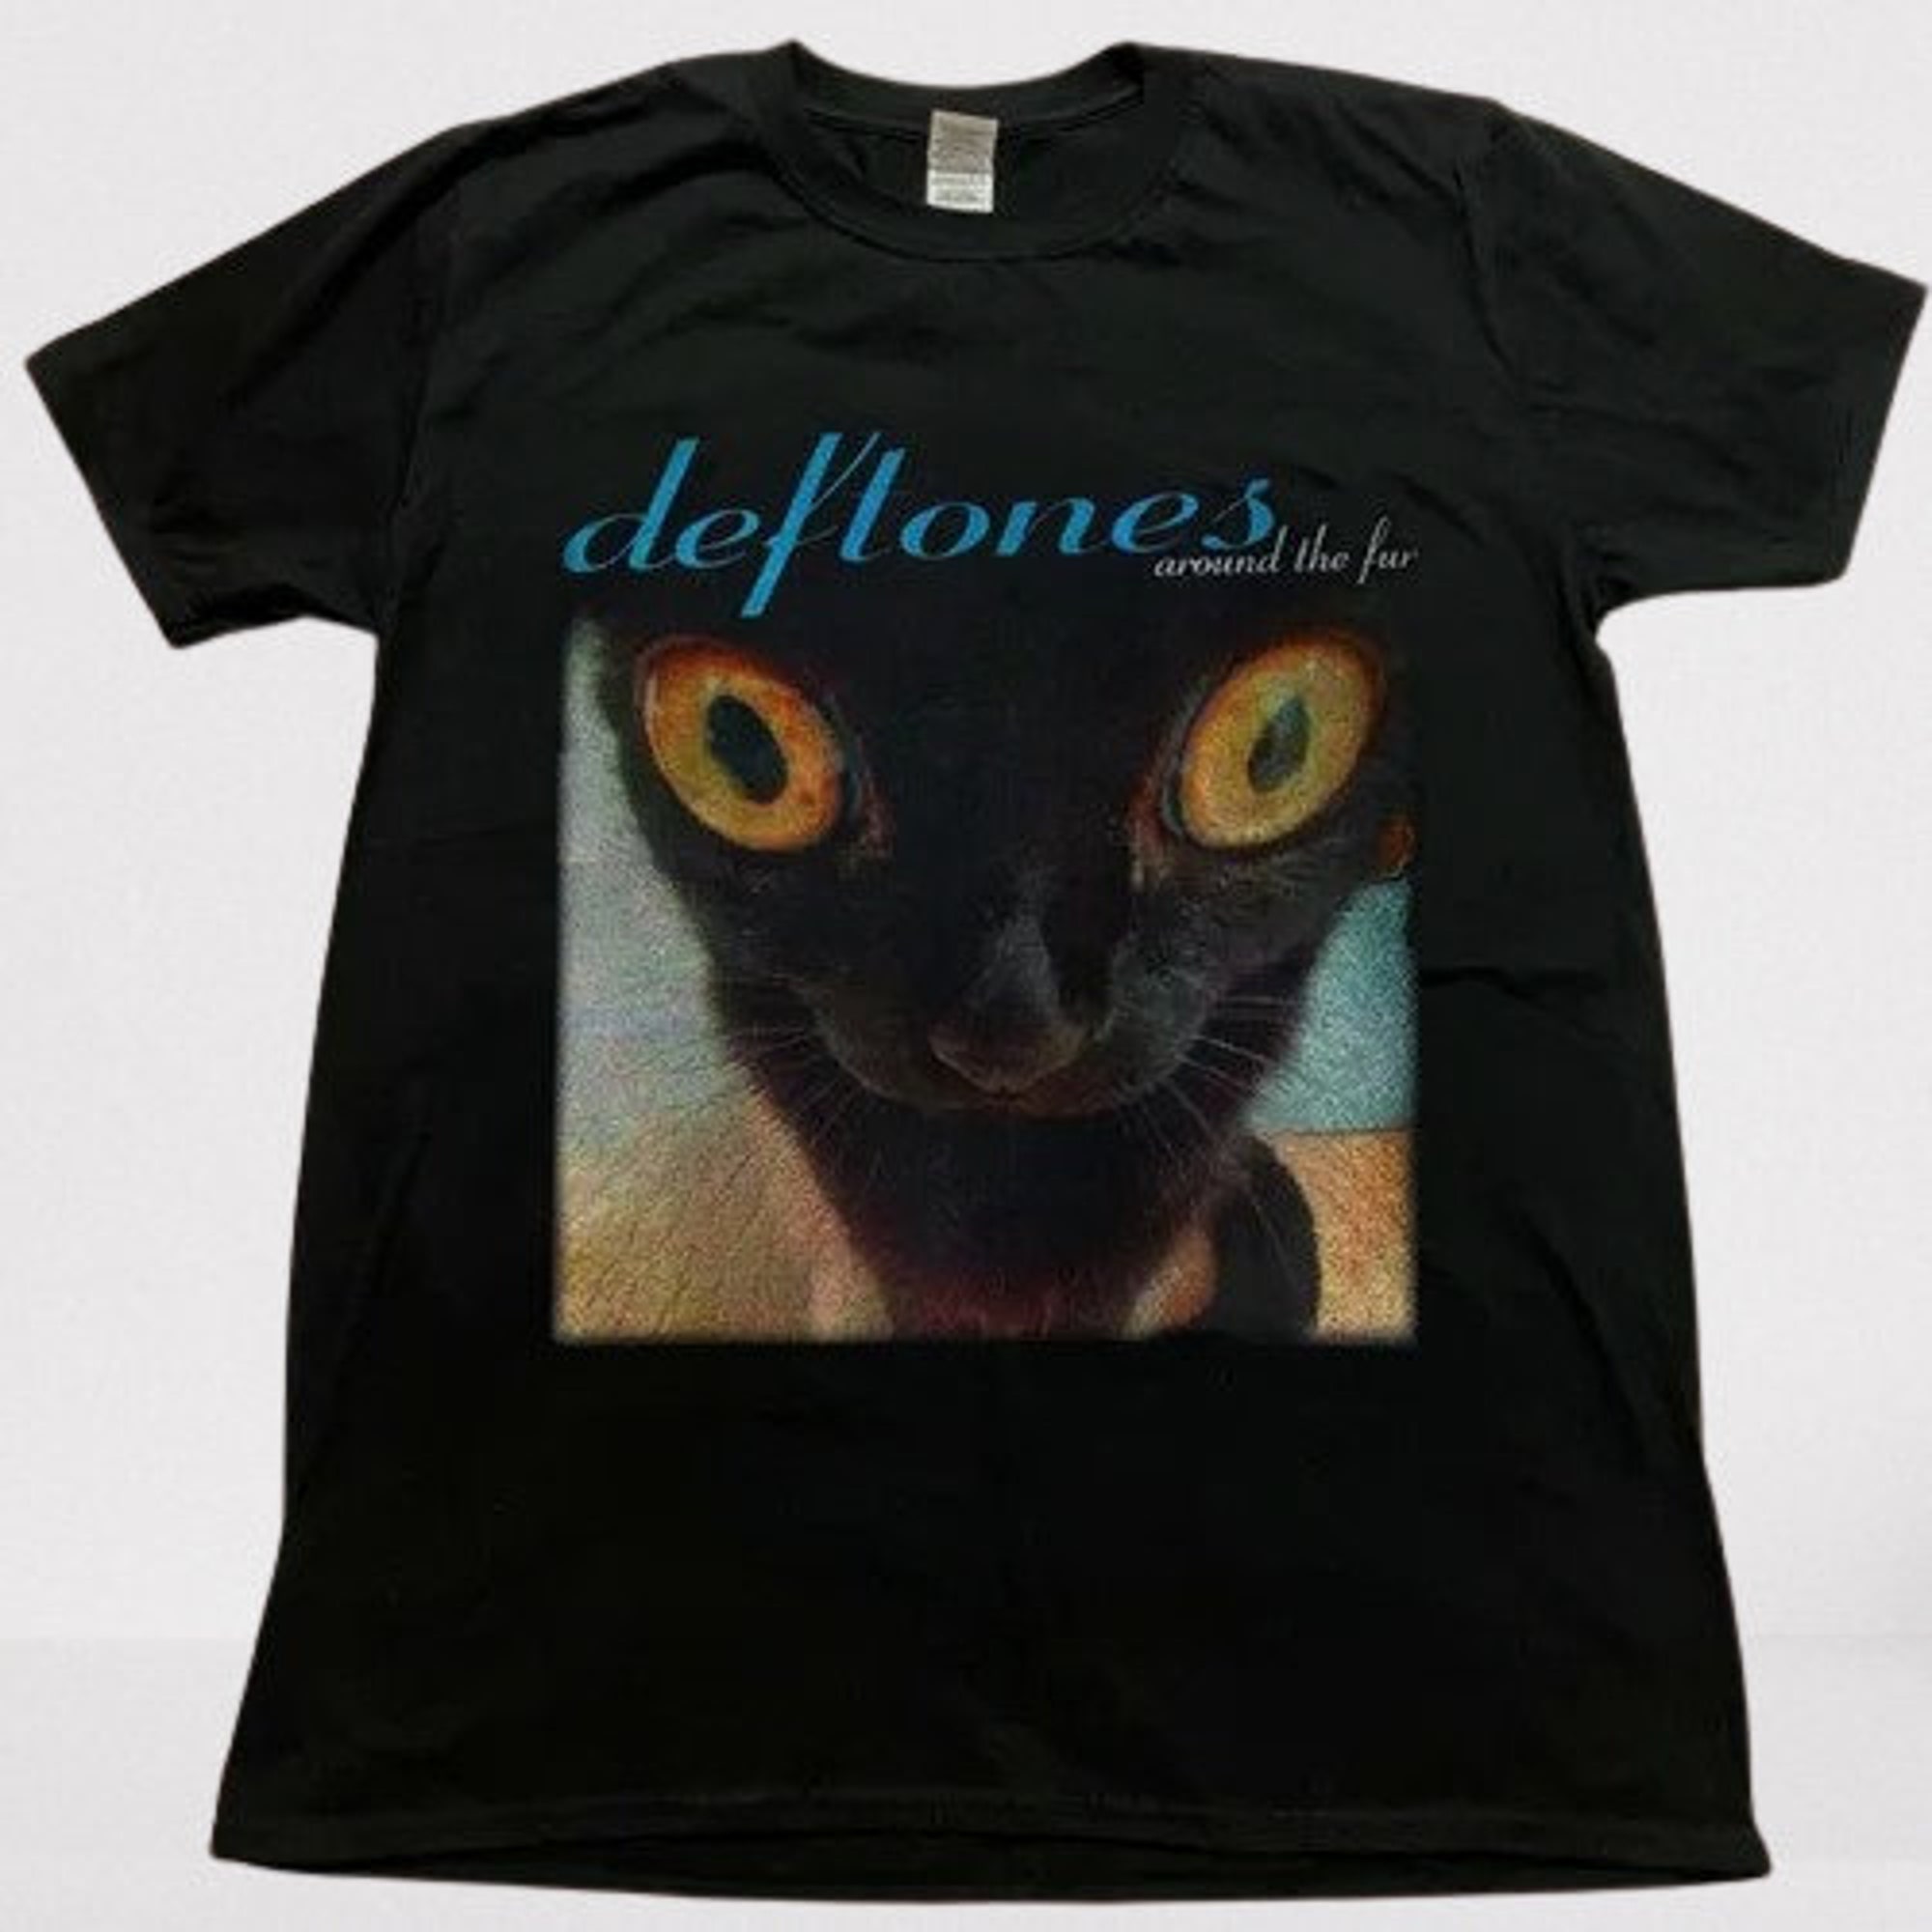 Discover vintage style t-shirt Deftones around the fur cat